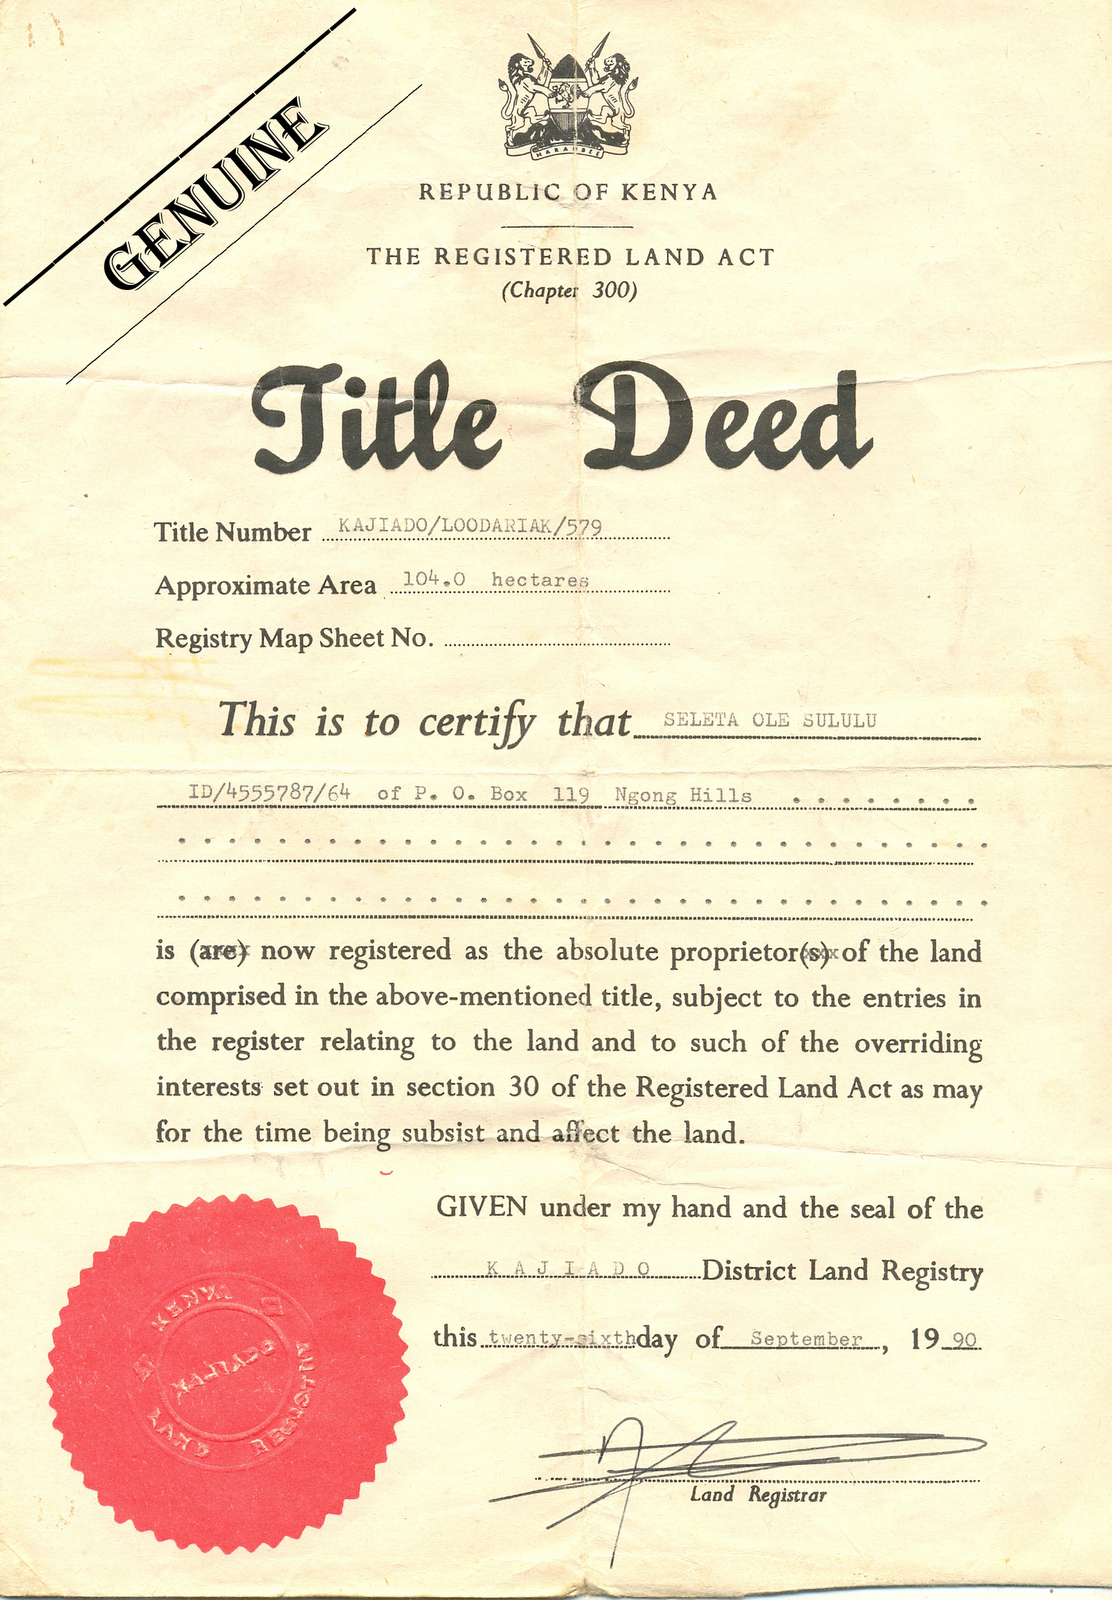 how-to-verify-your-land-title-deed-is-genuine